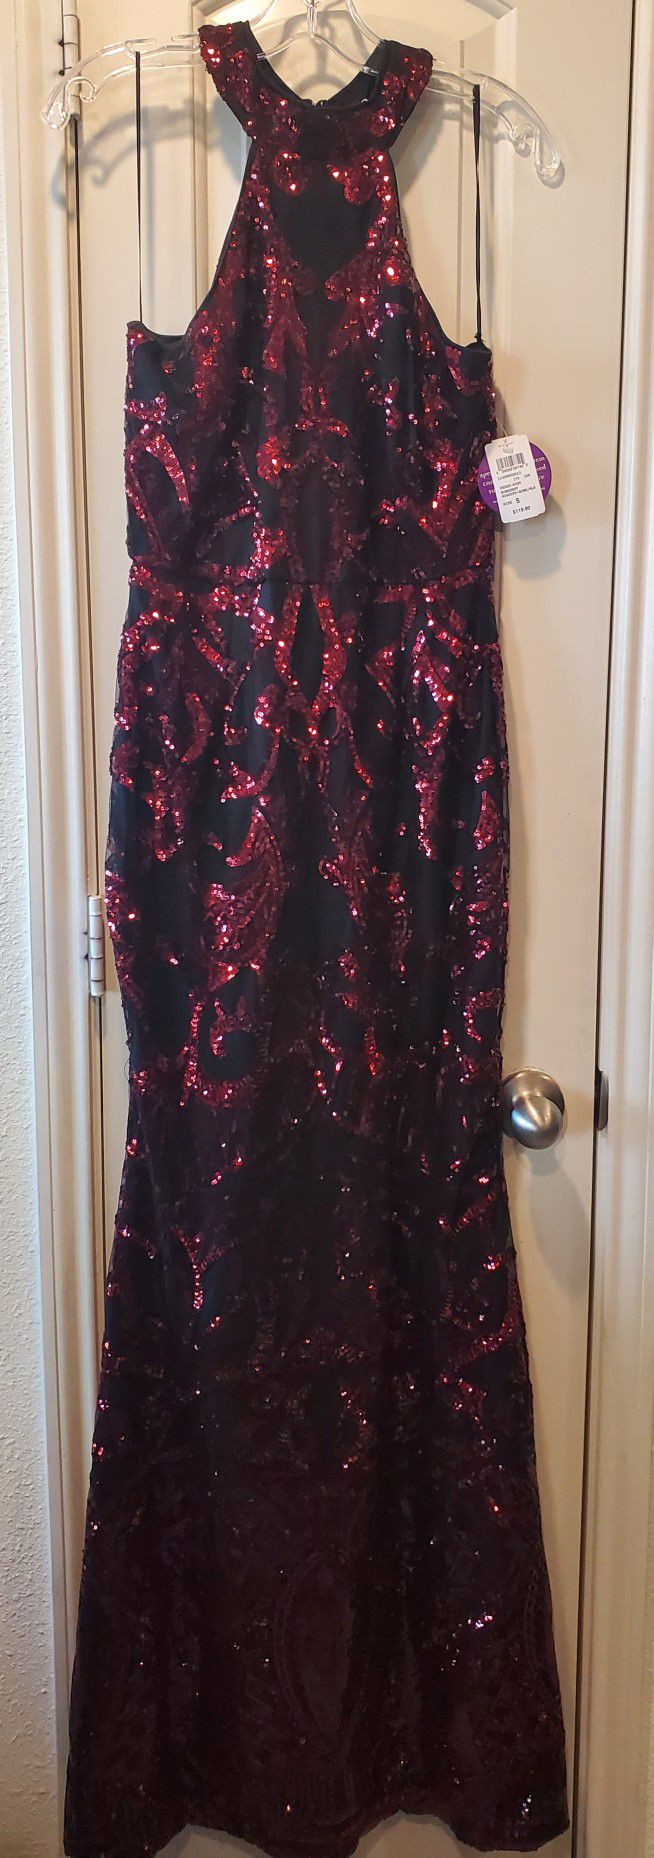 Windsor Formal Dress Size Small 